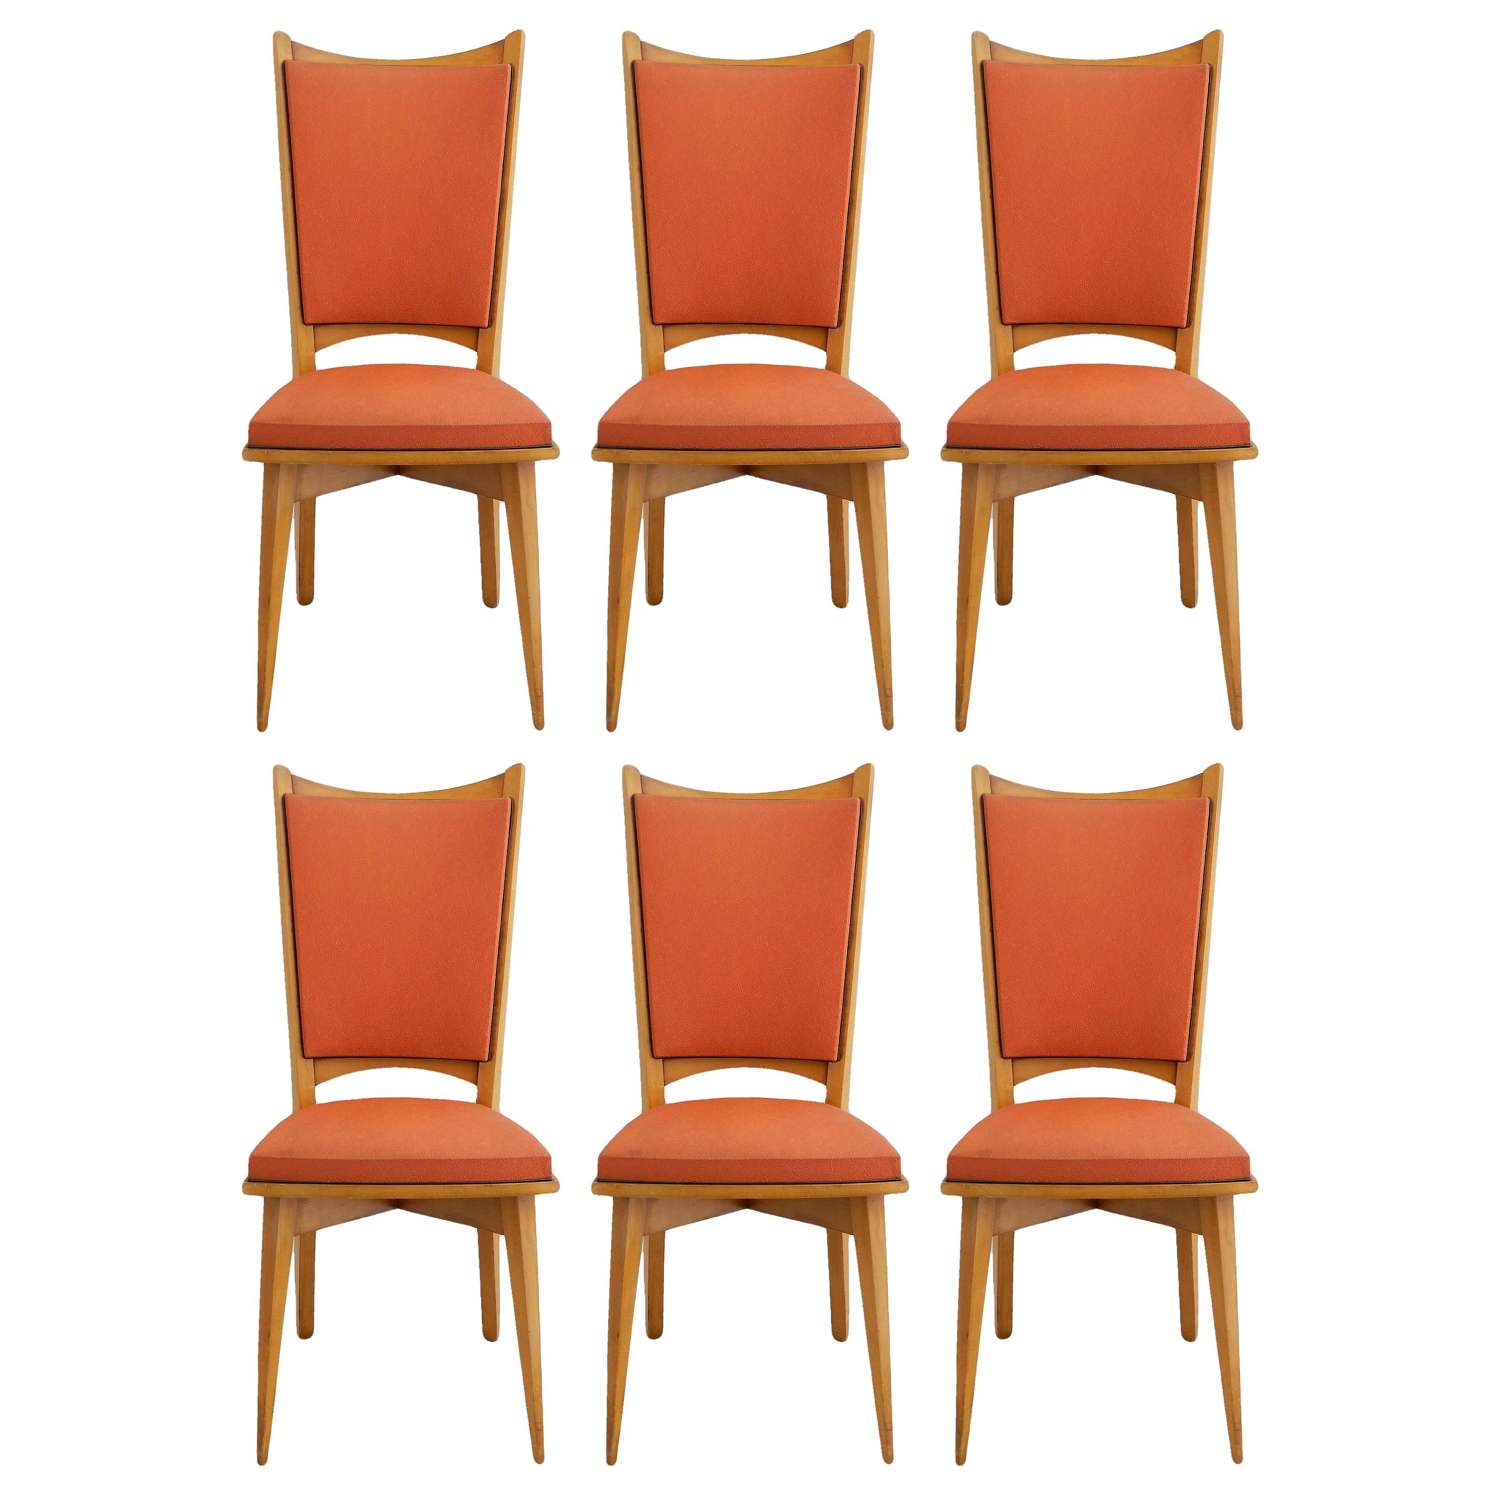 Six Midcentury French Dining Chairs Art Deco all Original in Good Cond